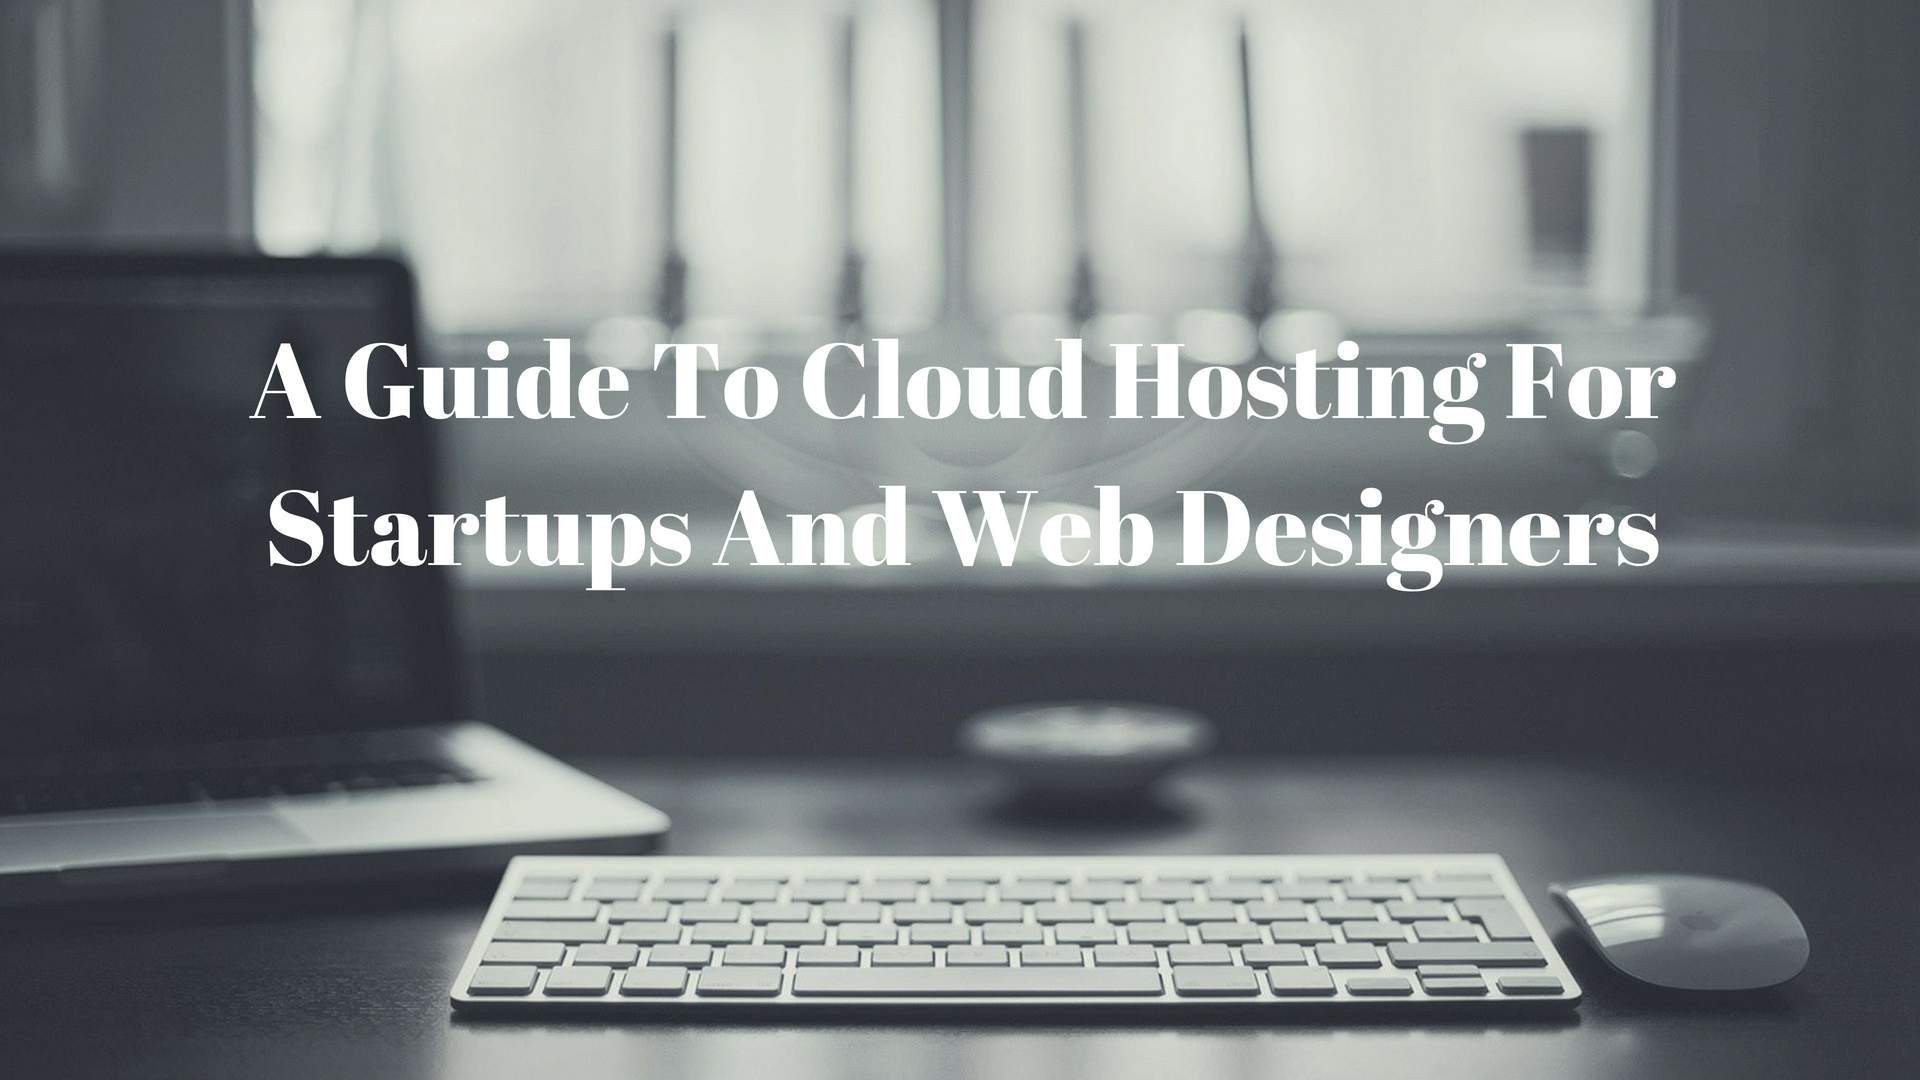 A Guide To Cloud Hosting For Startups And Web Designers